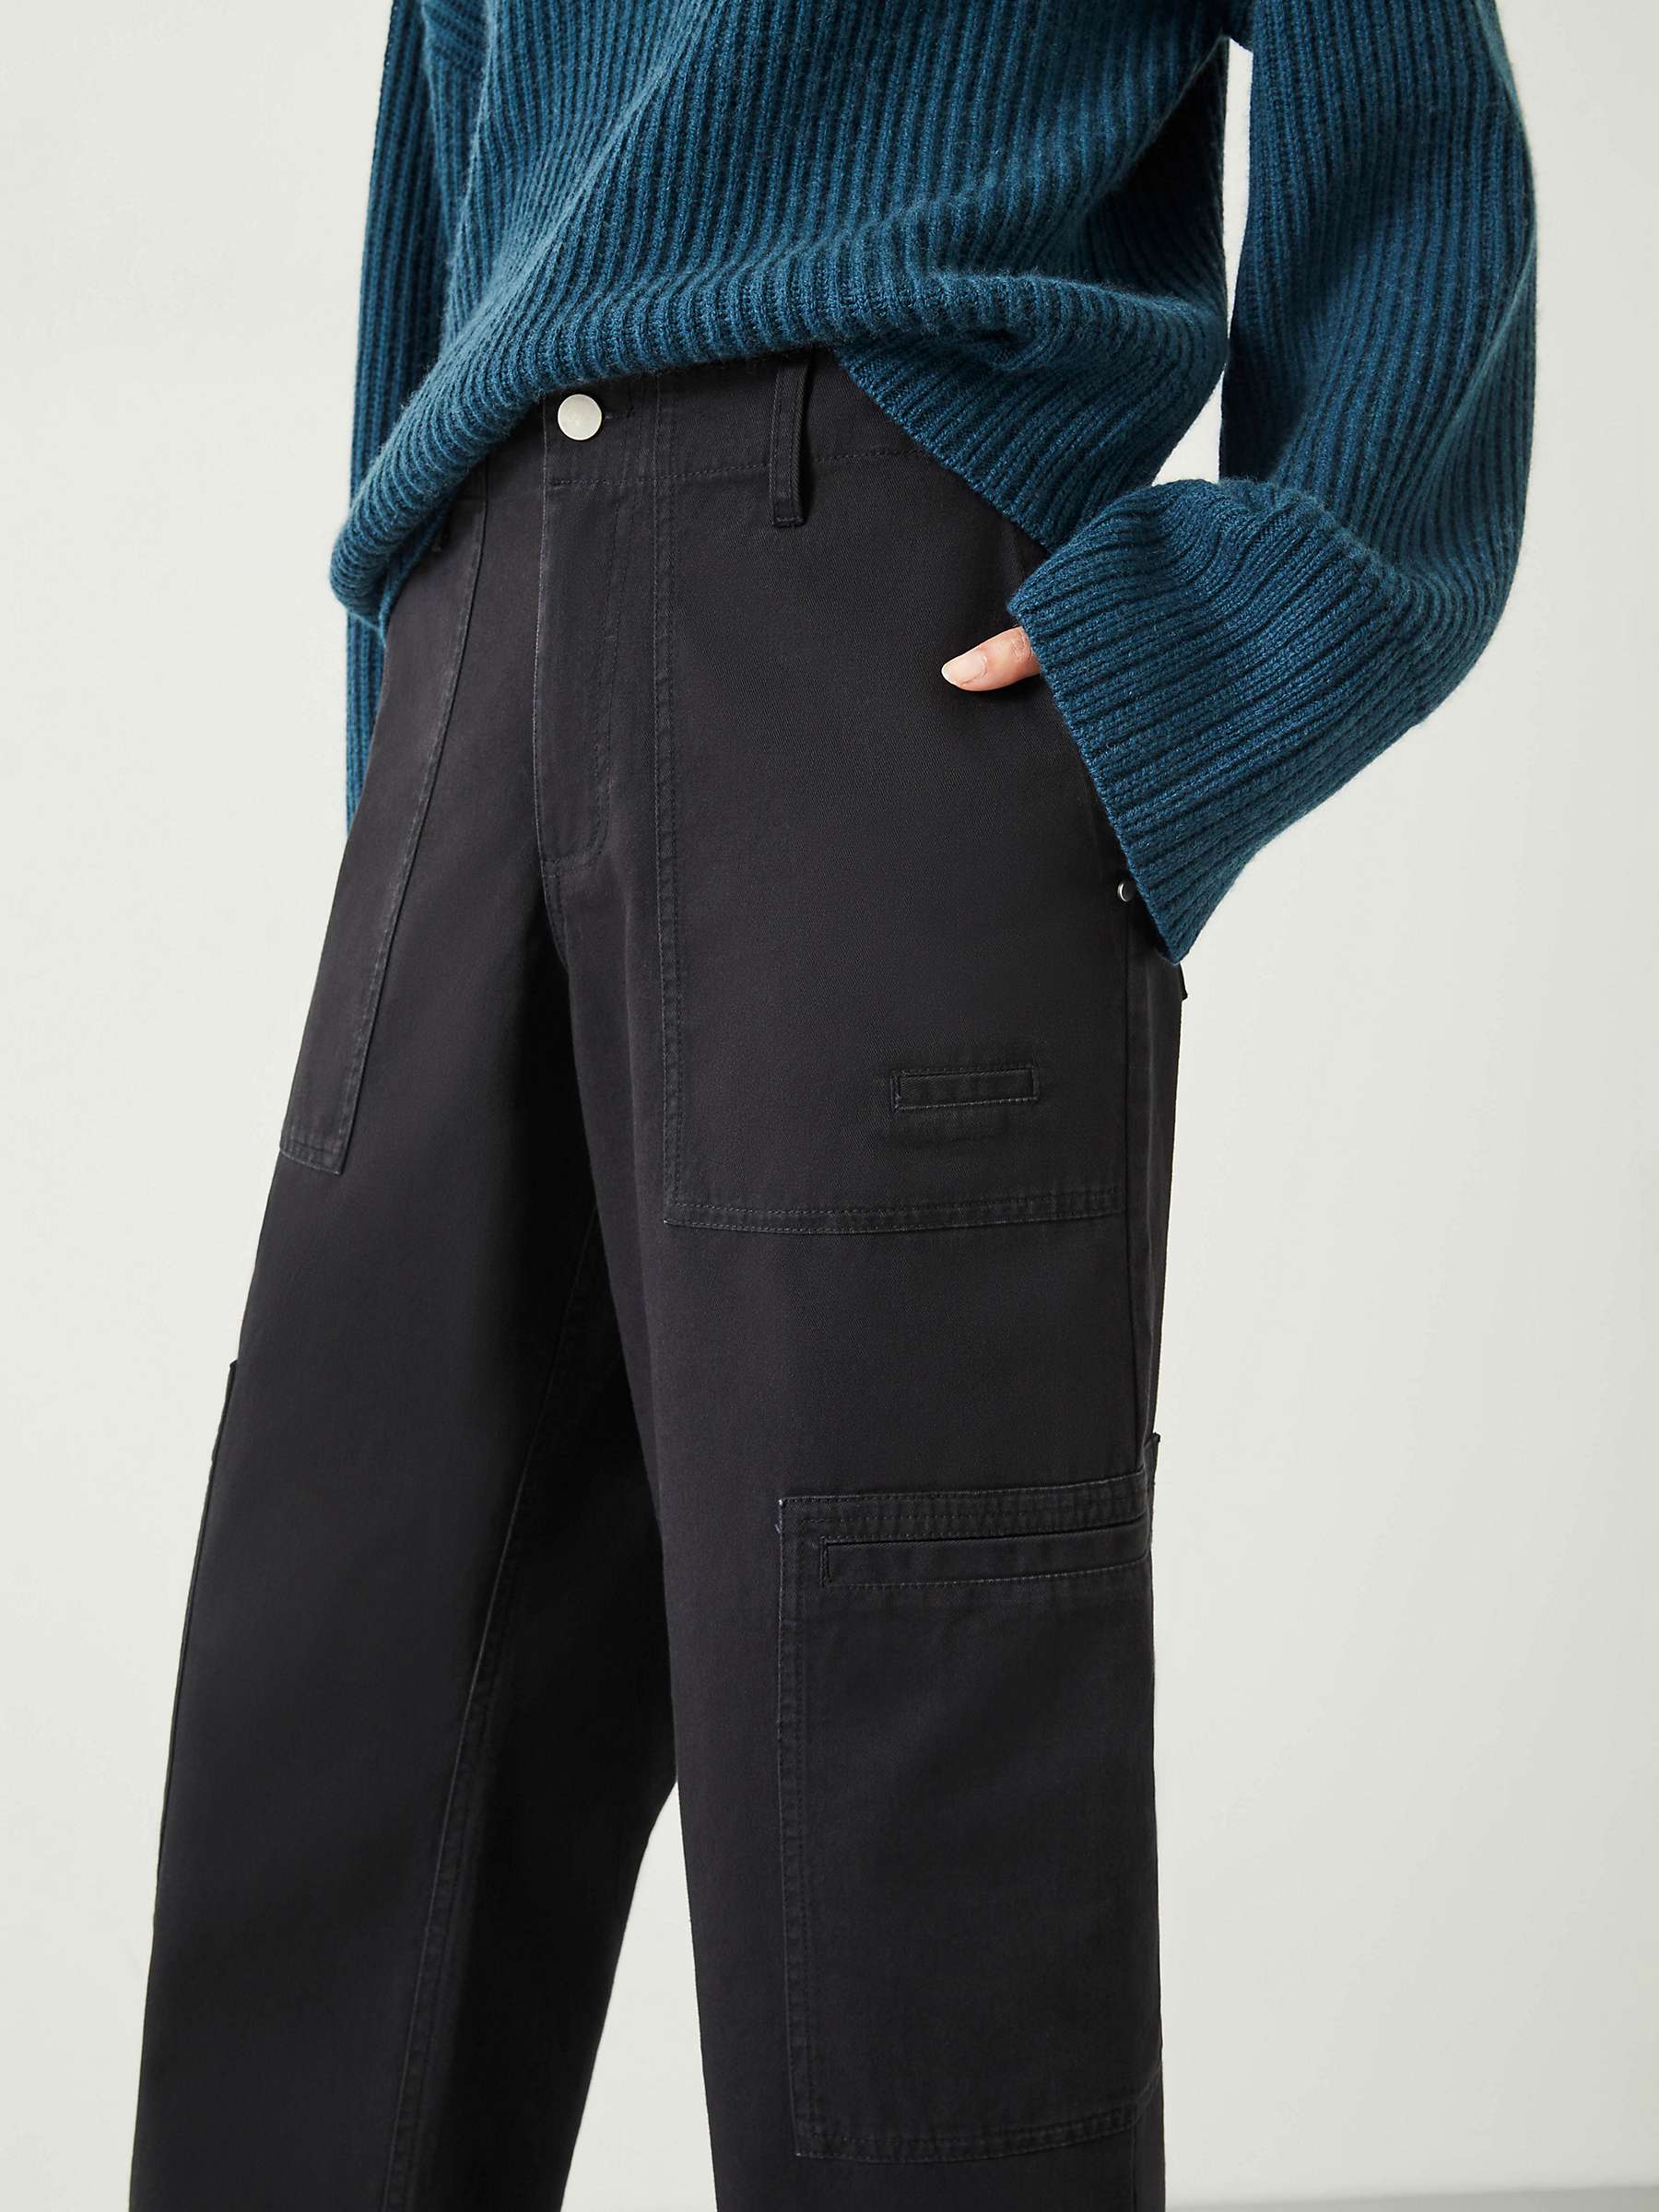 Buy HUSH Sydney Utility Trousers Online at johnlewis.com